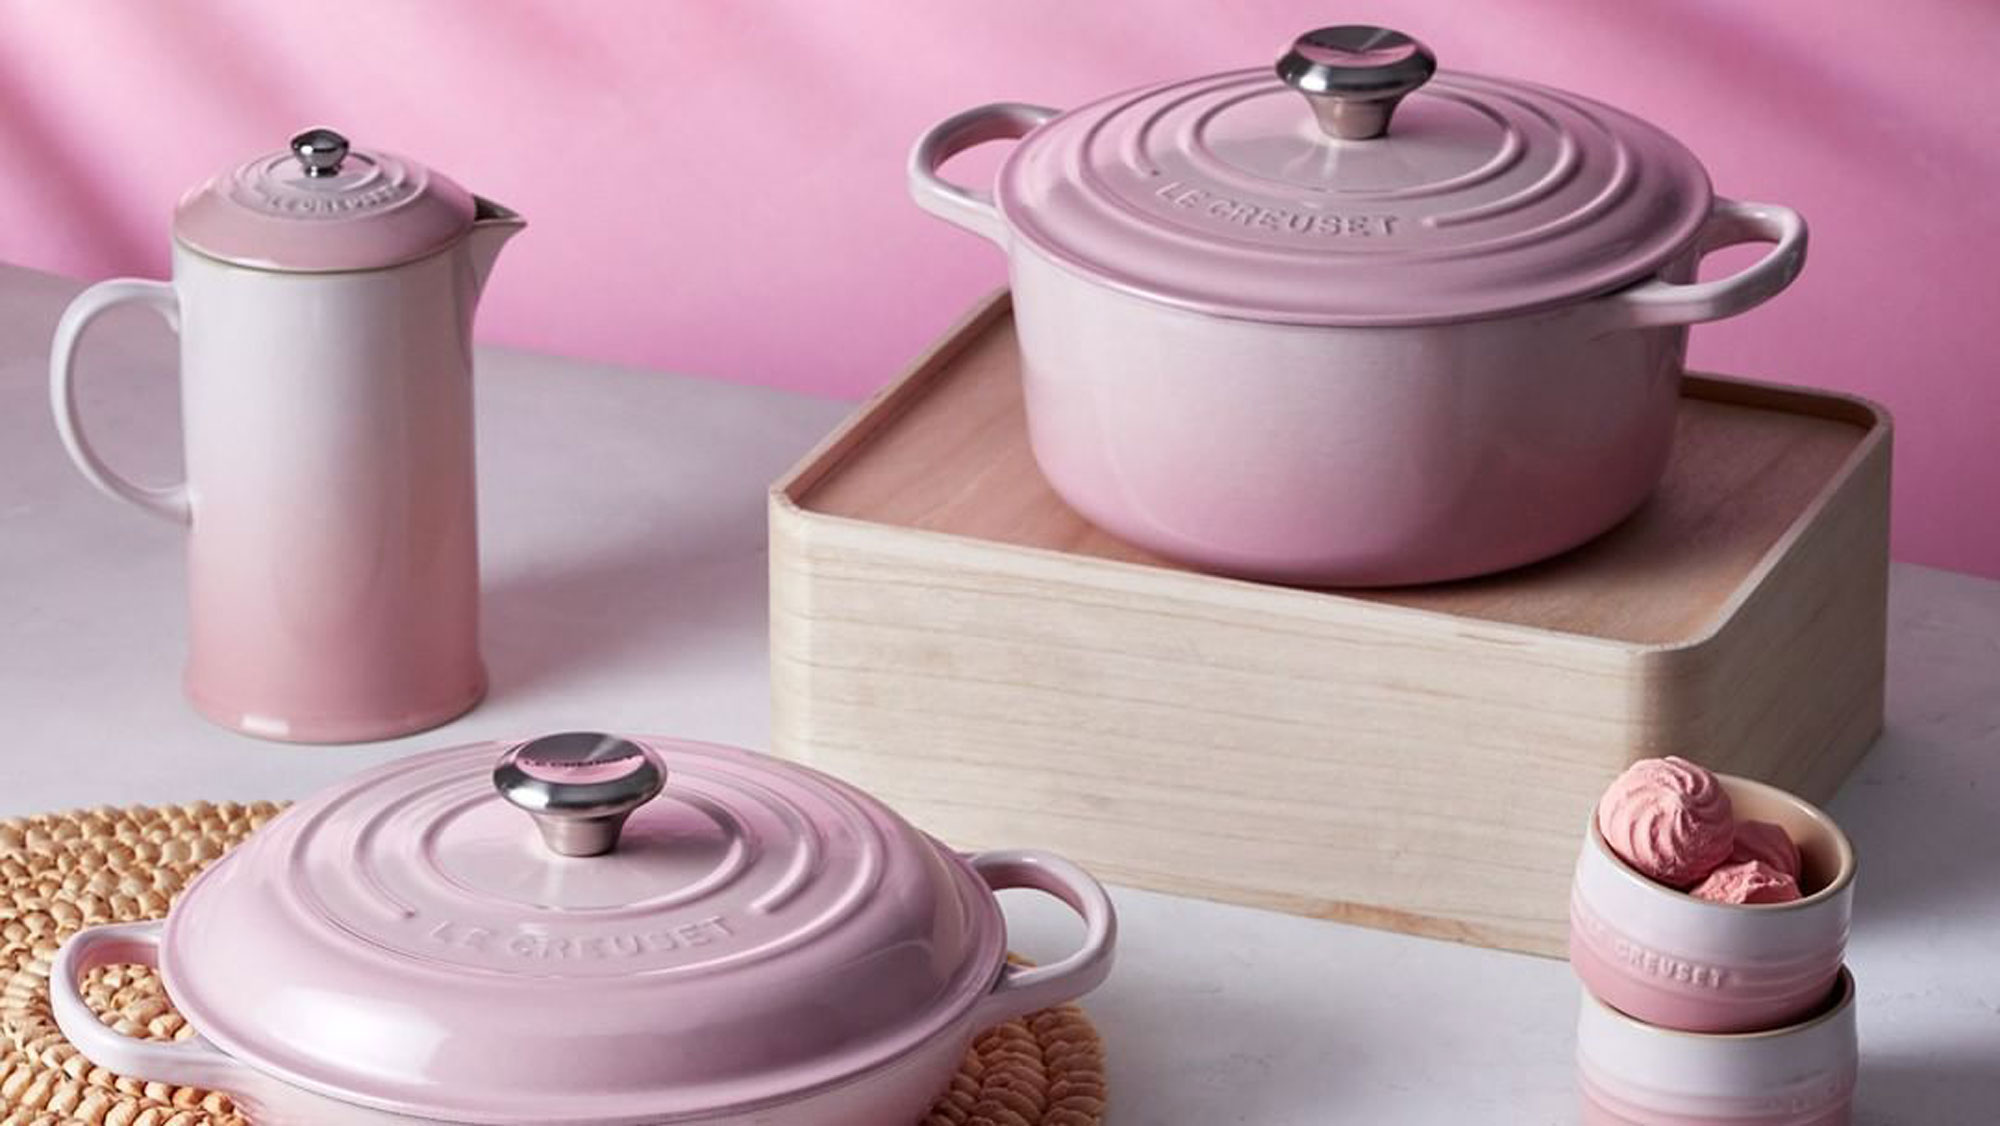 Le Creuset launches new soft pink colourway